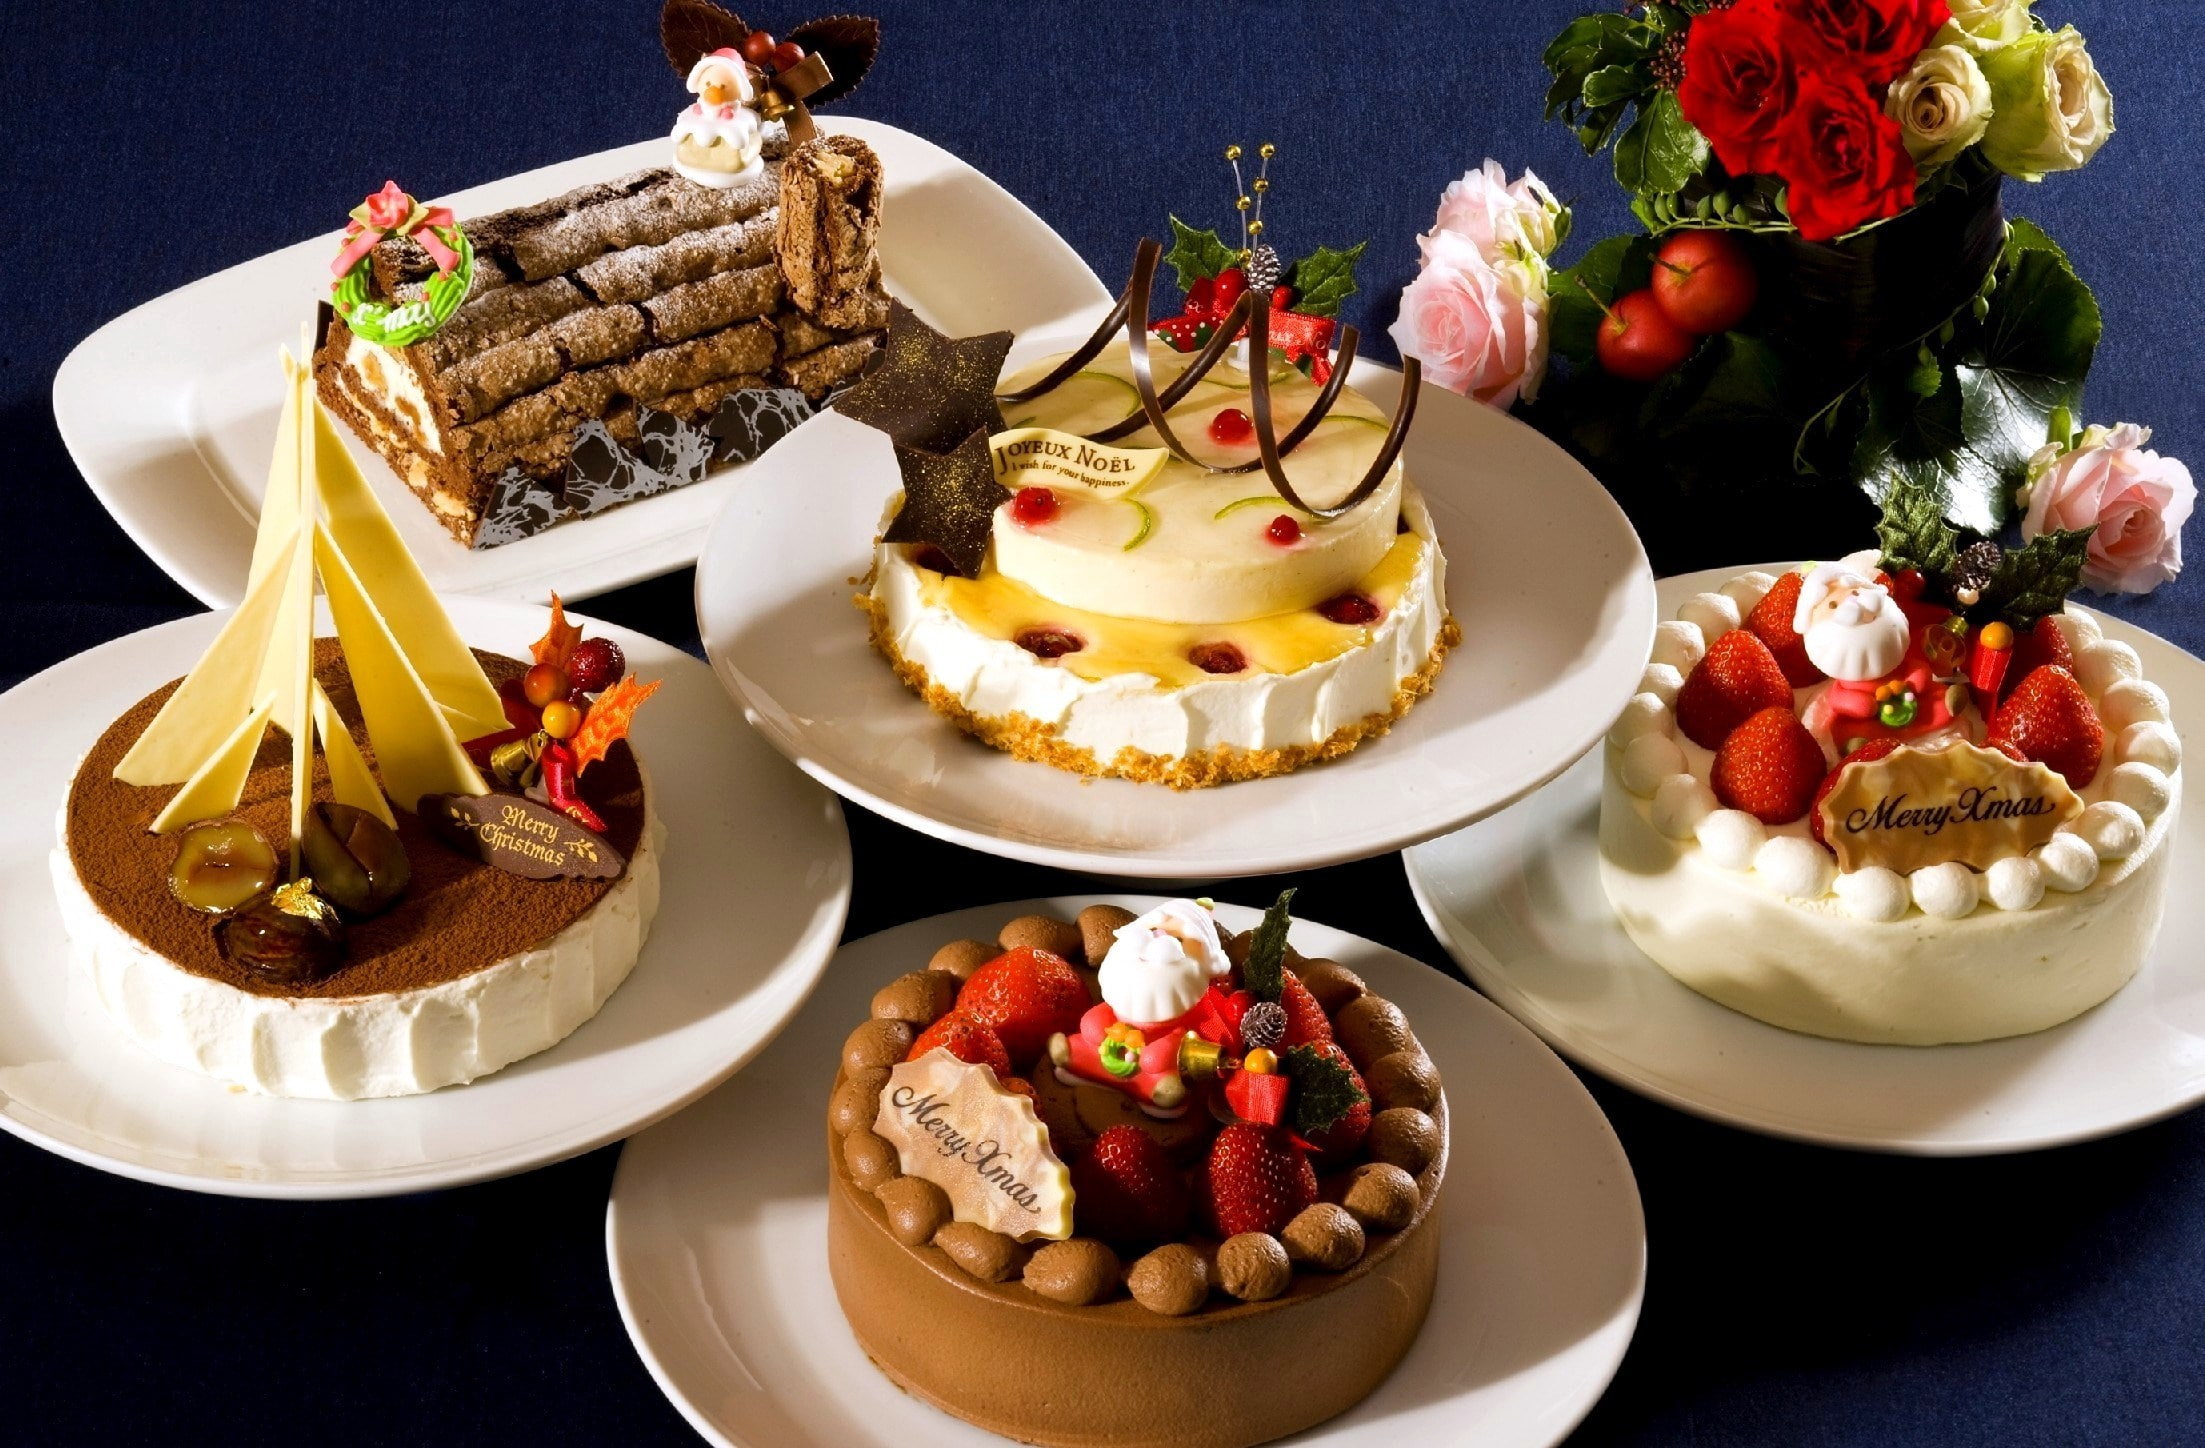 assorted baked cakes, chocolate, strawberry, decoration, sweet